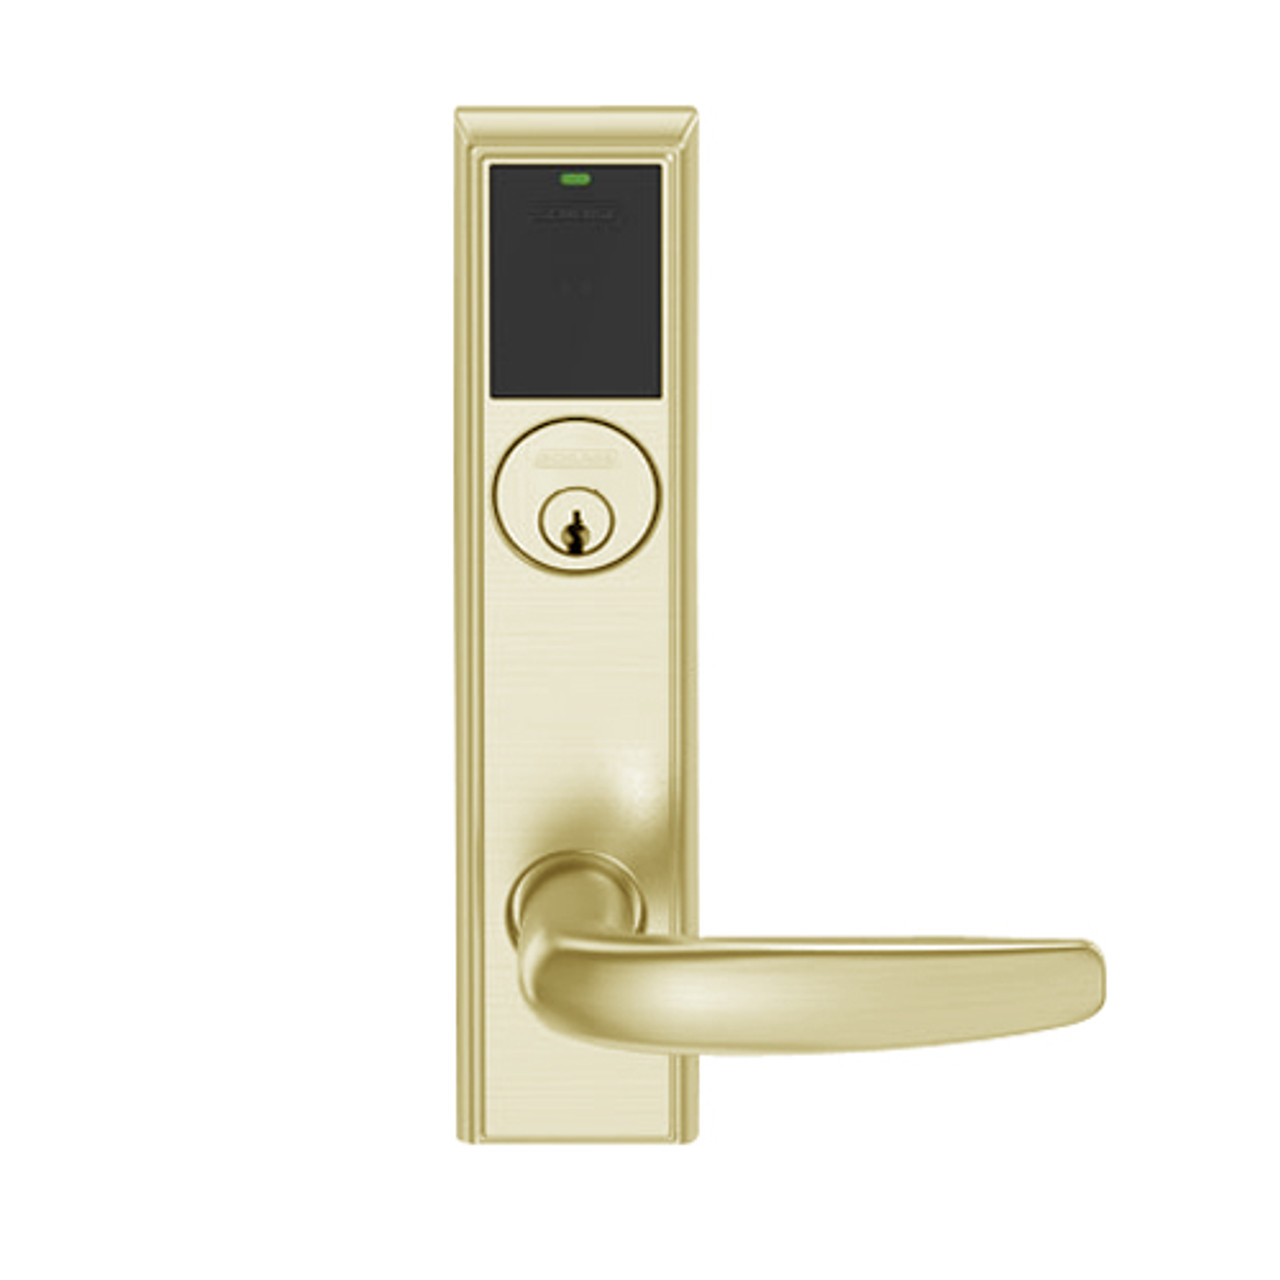 LEMD-ADD-P-07-606 Schlage Privacy/Apartment Wireless Addison Mortise Deadbolt Lock with LED and Athens Lever in Satin Brass